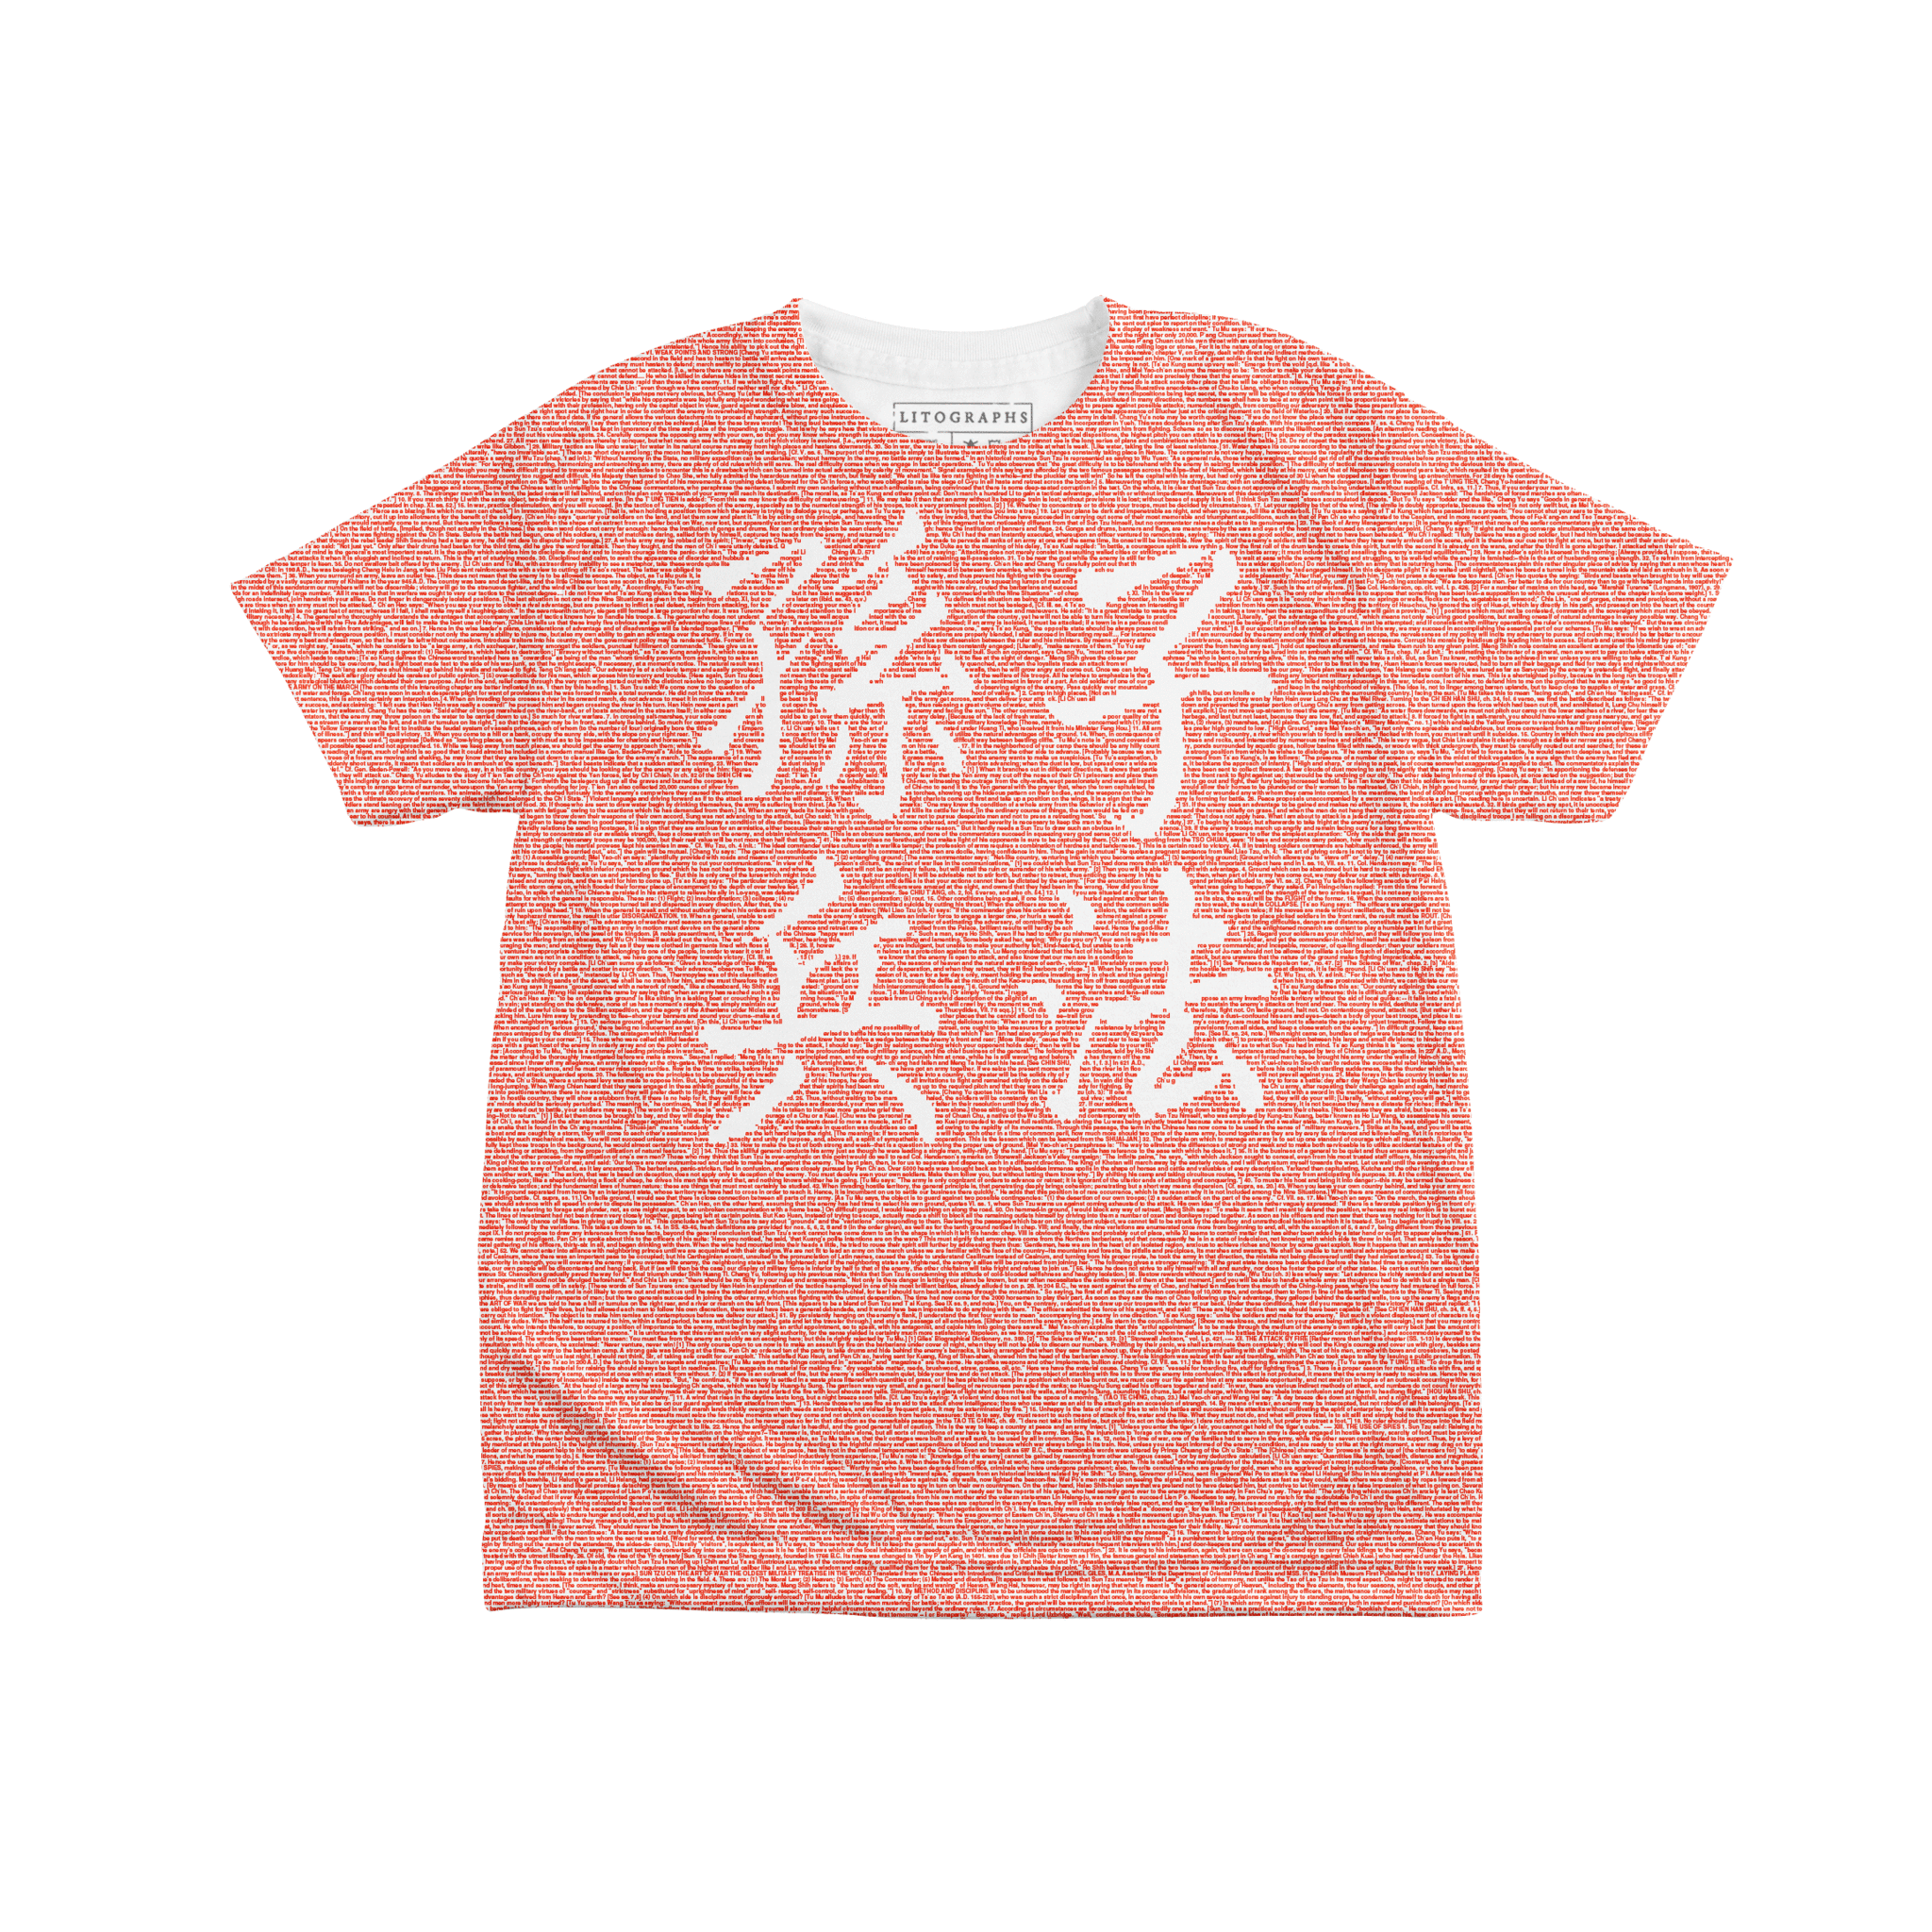 The Art of War by Sun Tzu - Entire Book on T-Shirt | Best Gift for Readers and Book Lovers | Litographs